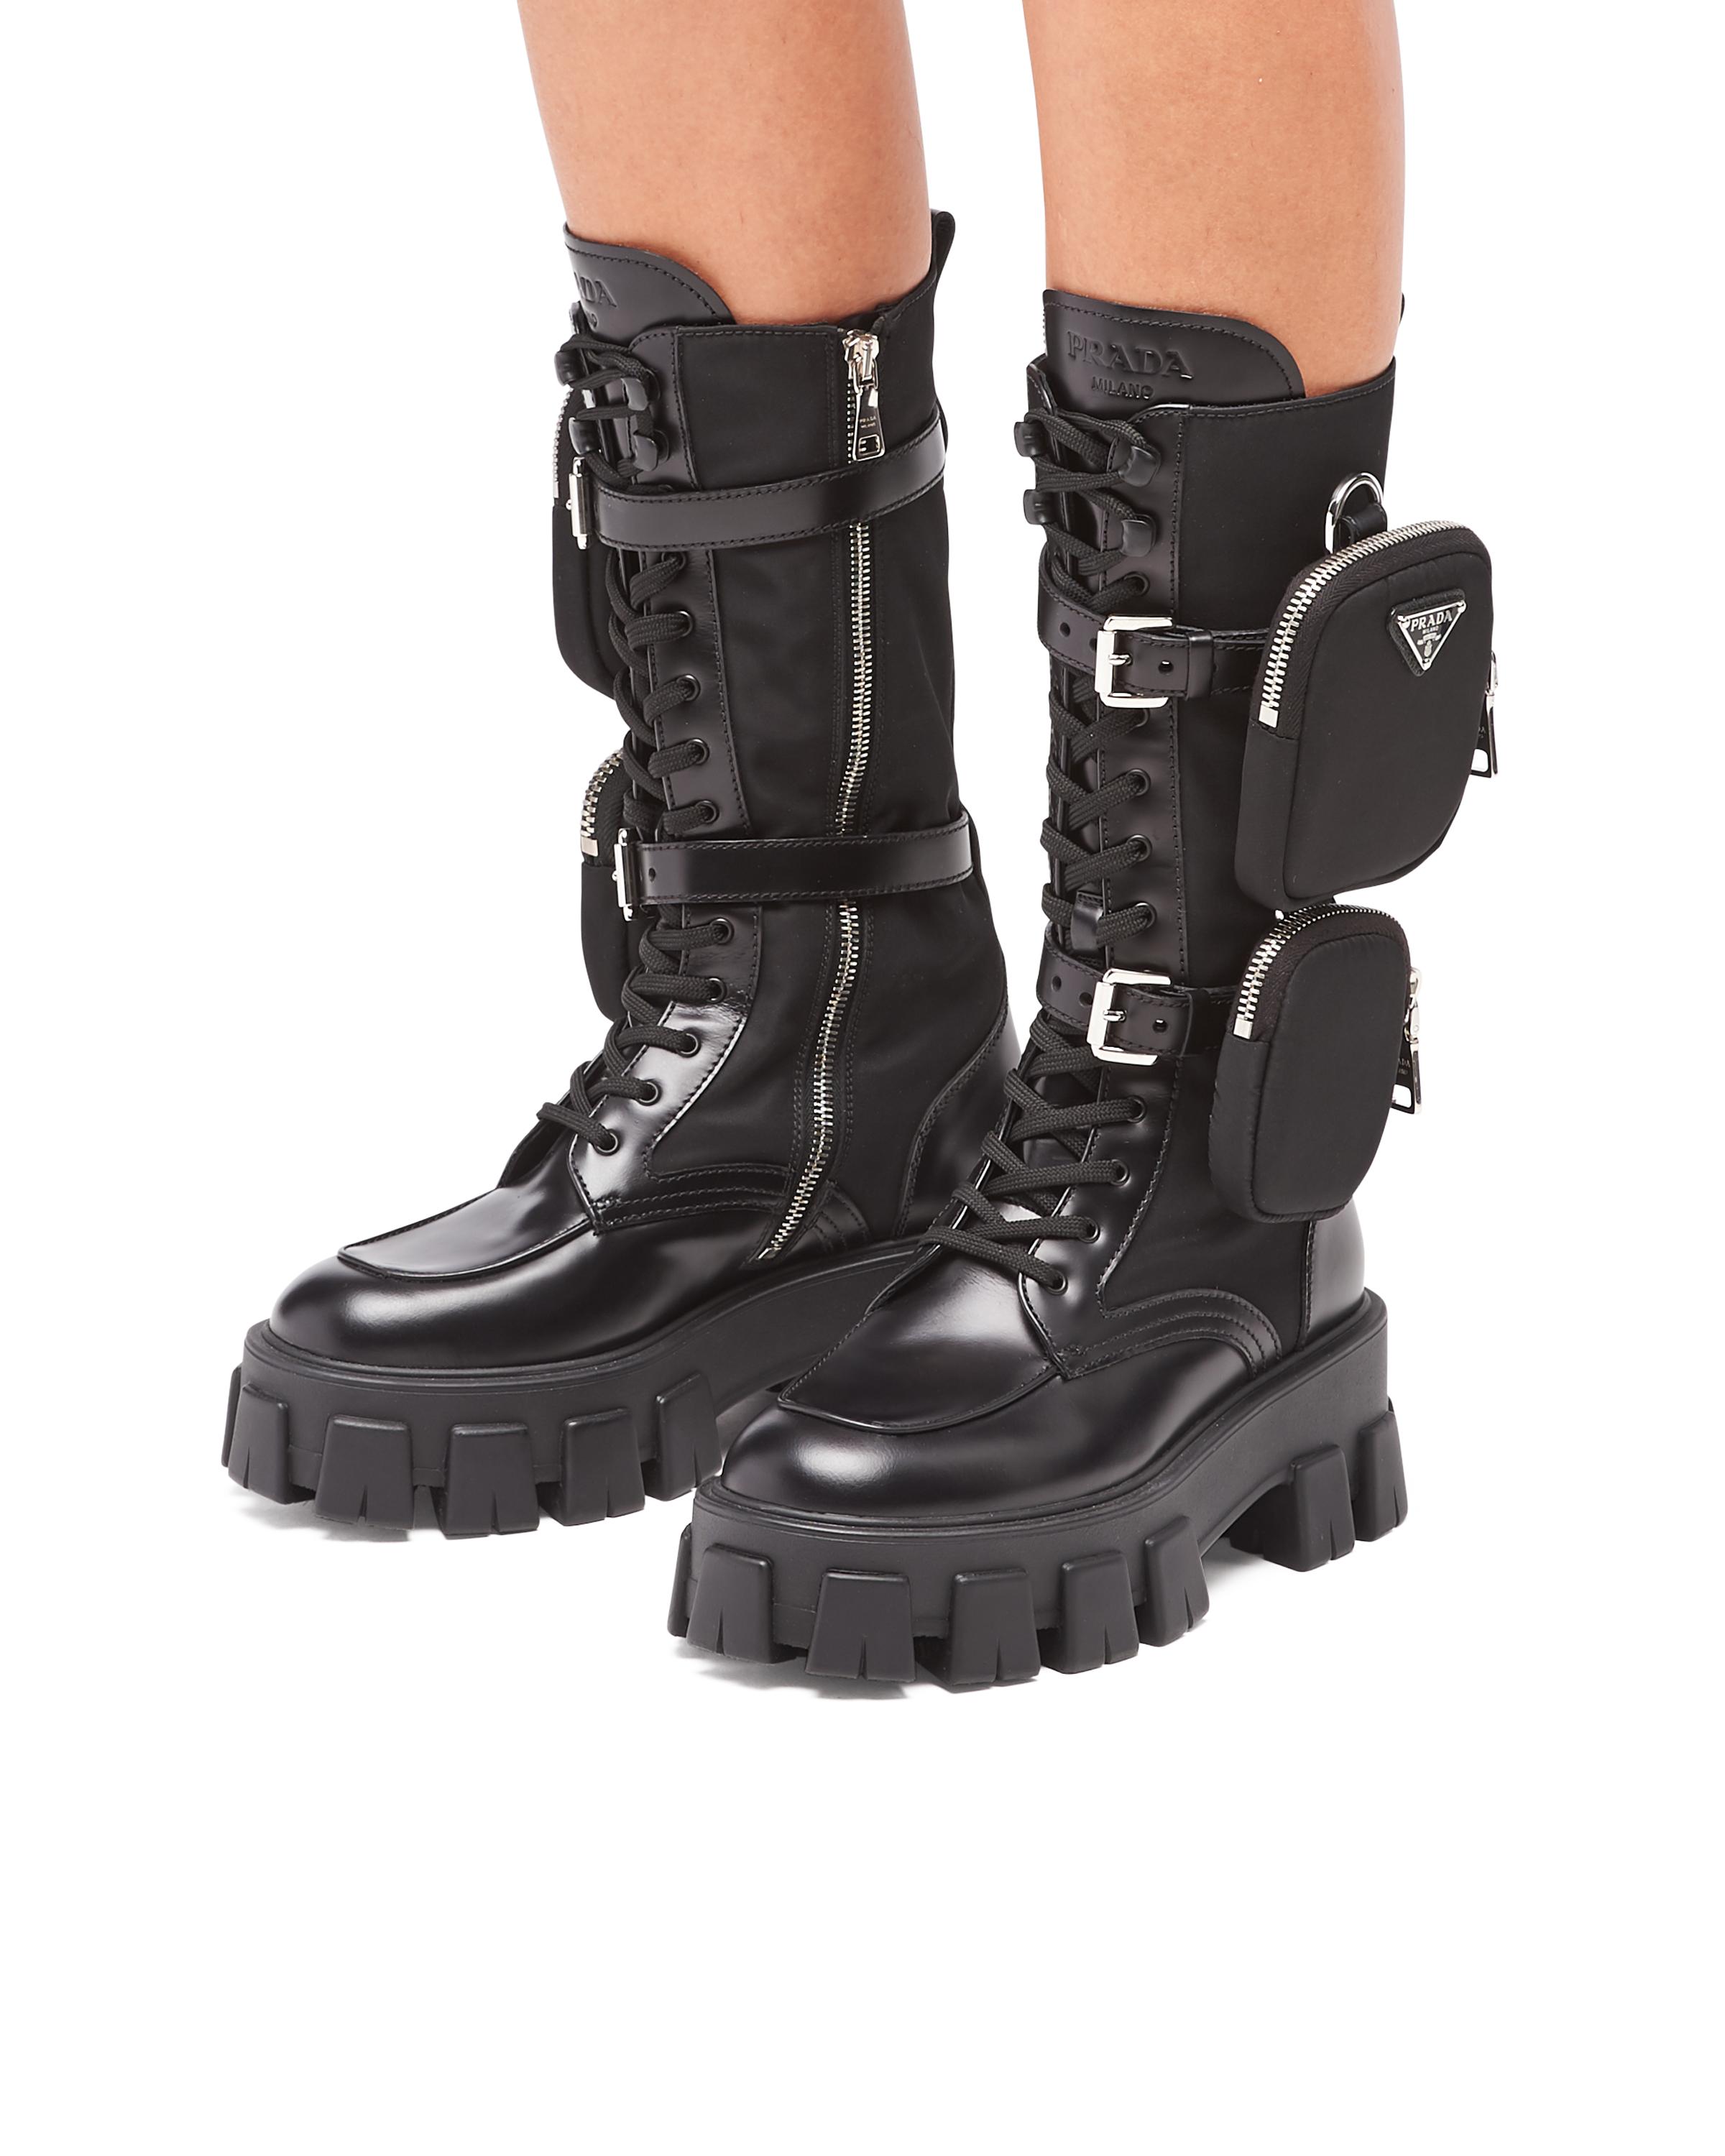 Prada Monolith Leather And Nylon Boots in Black | Lyst